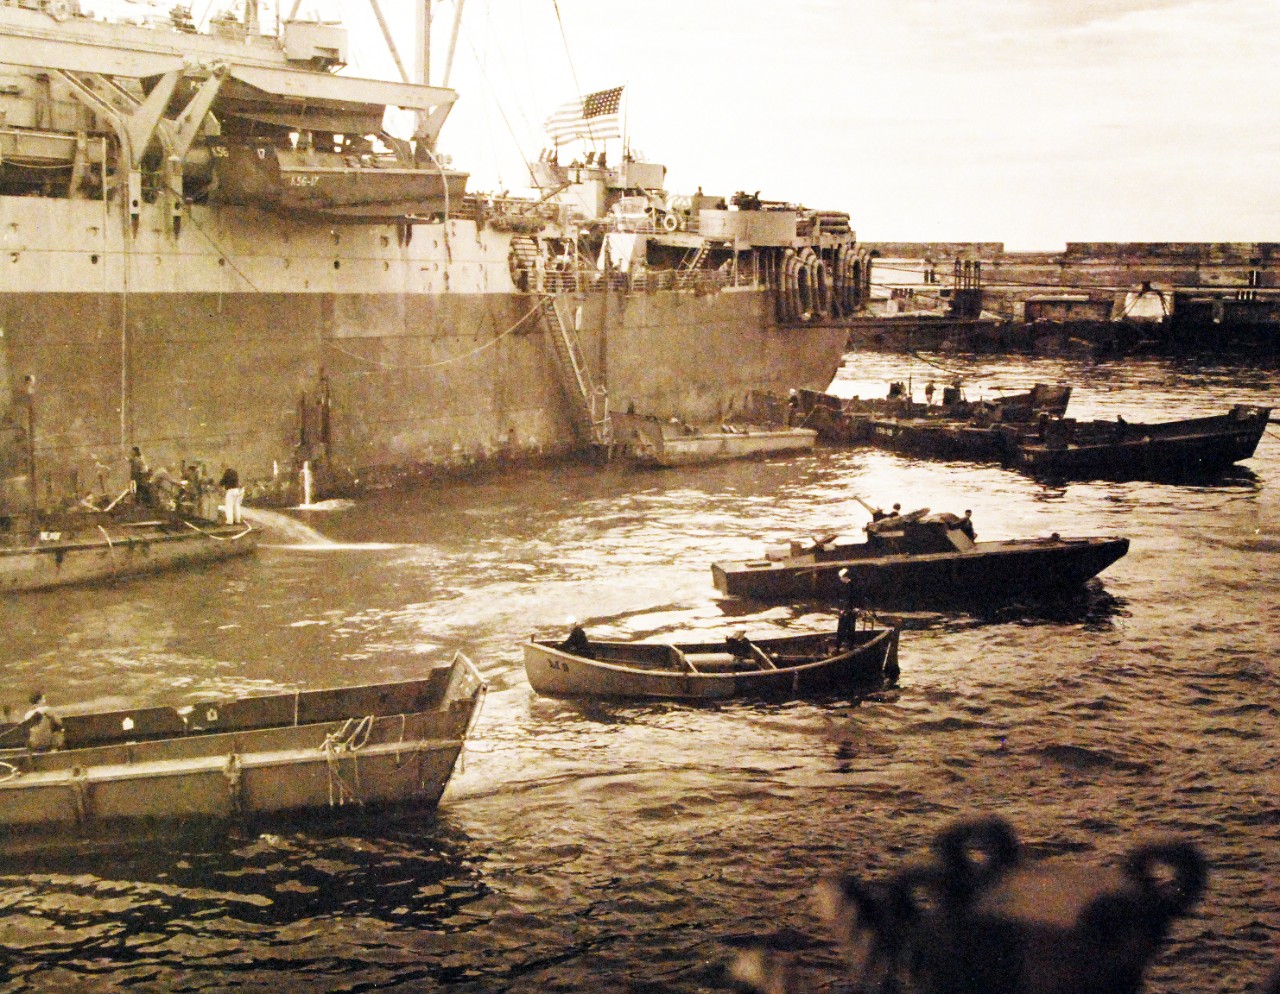 <p>80-G-30676: Operation Torch, November 1942. USS Harry Lee (AP 17), tank lighters and support craft at Casablanca, Morocco, during the campaign, November 13, 1942.&nbsp;</p>
